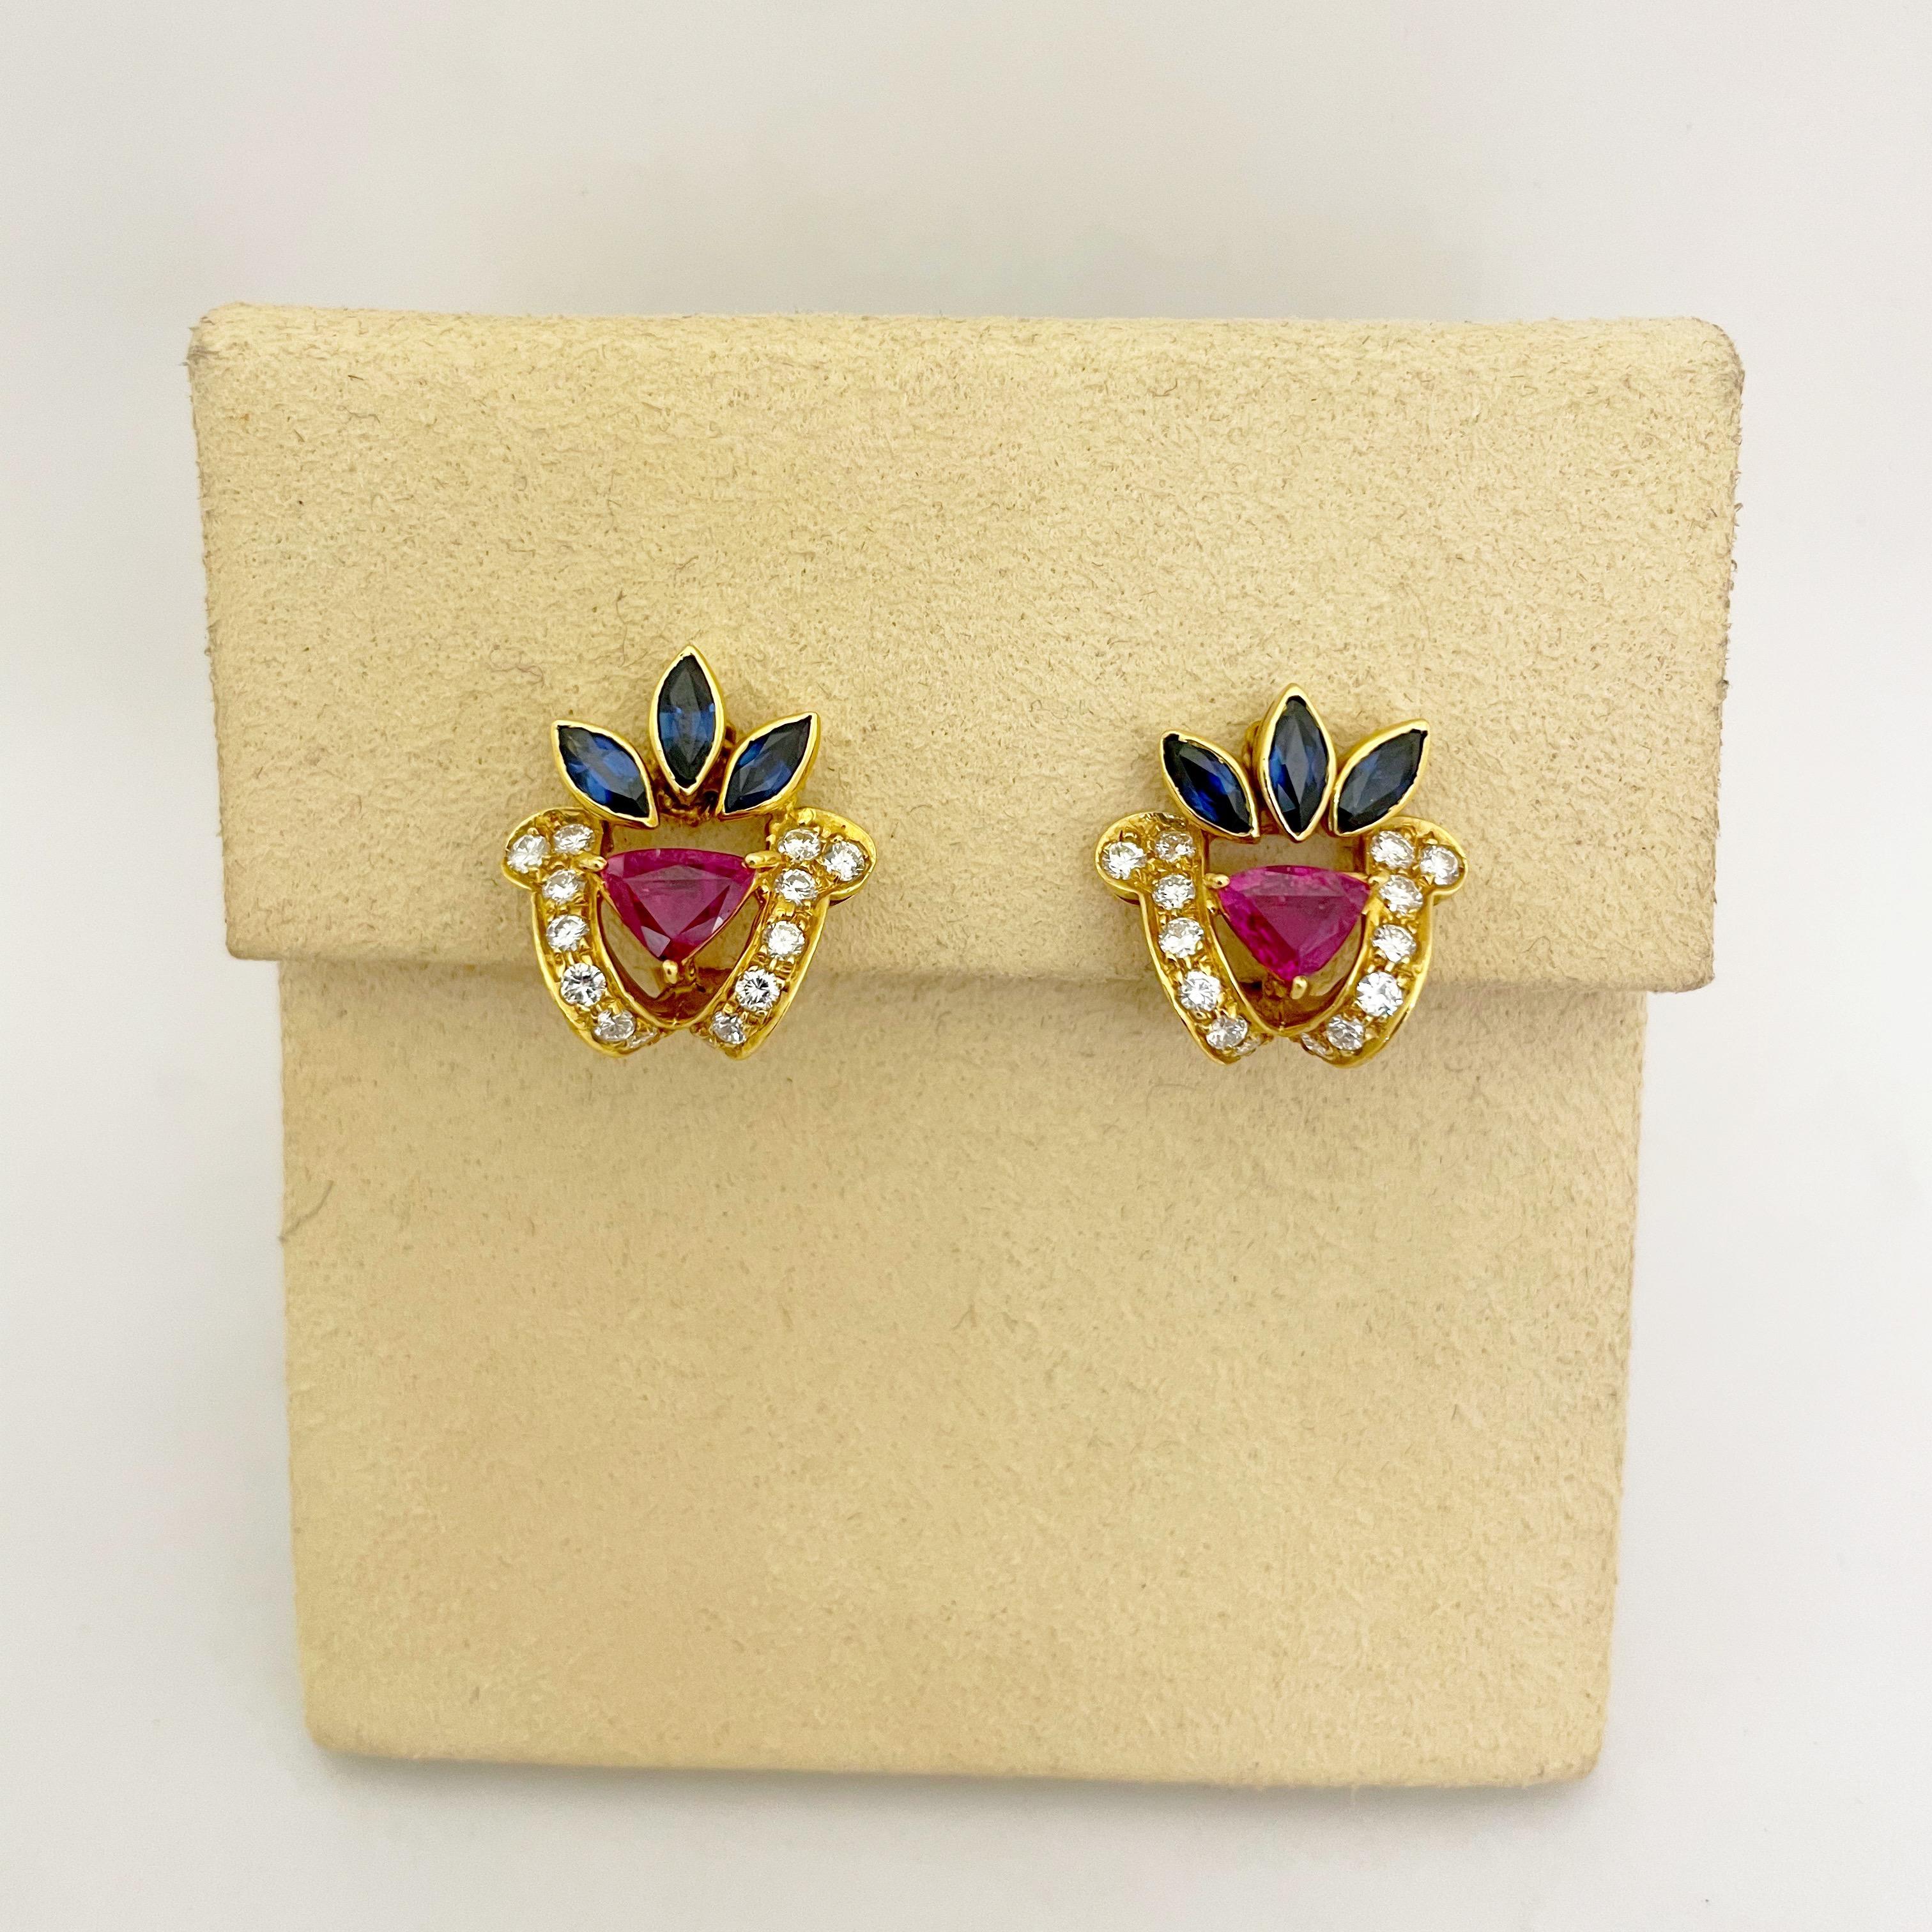 Trillion Cut 18KT Gold, 1.78 Carat Ruby, 1.59 Carat Sapphire, and .81 Carat Diamond Earrings For Sale